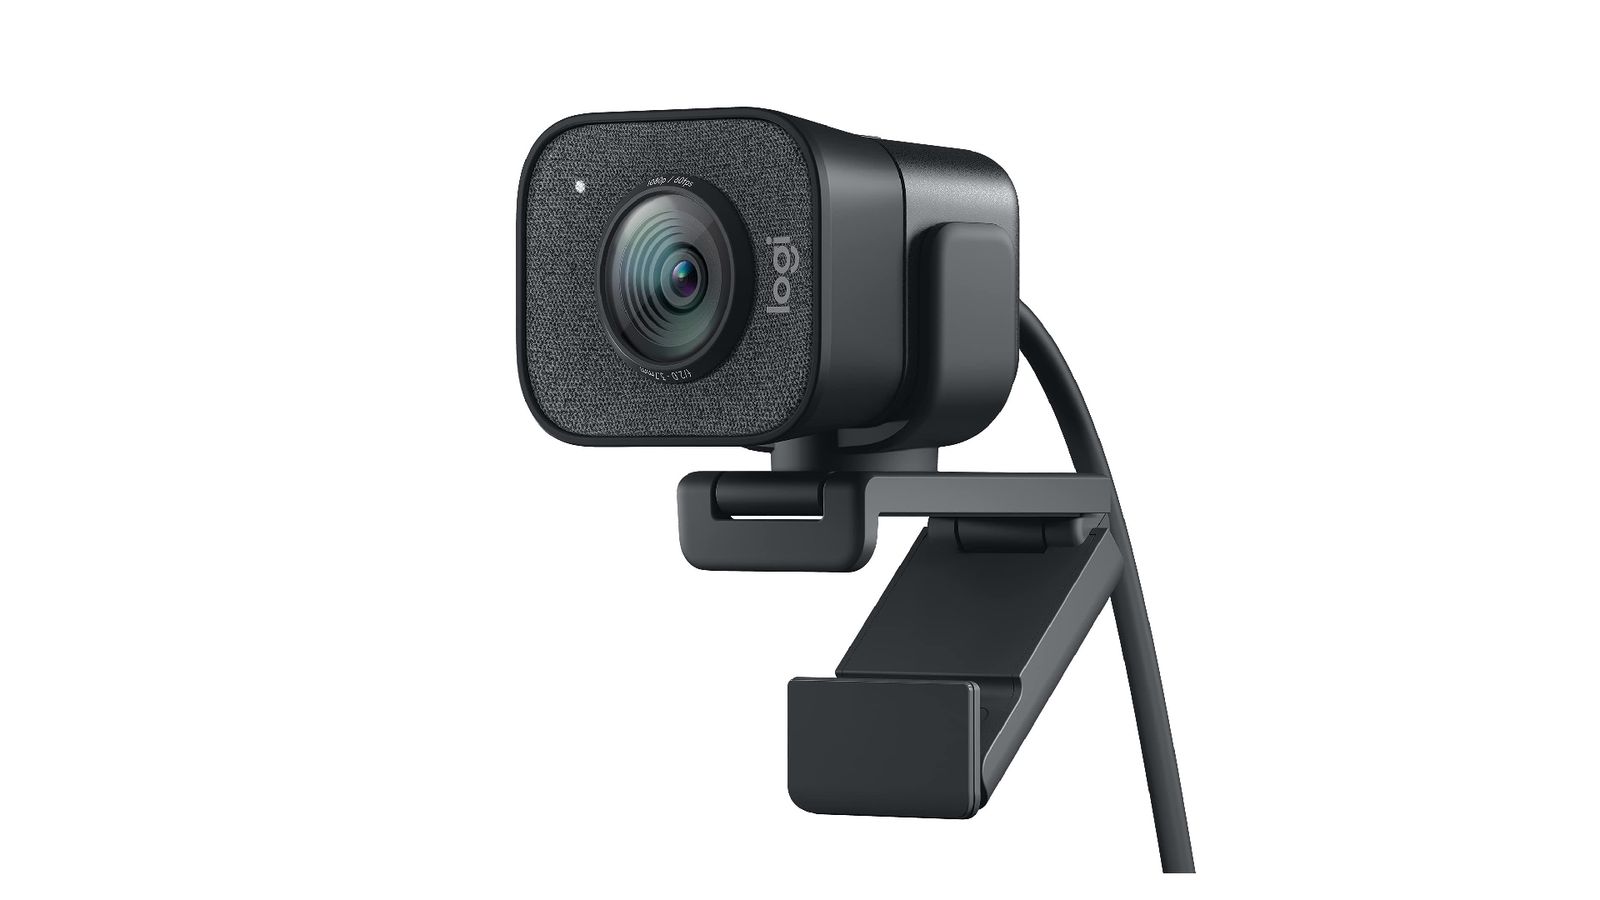 Logitech StreamCam 1080p product image of a black wired webcam.